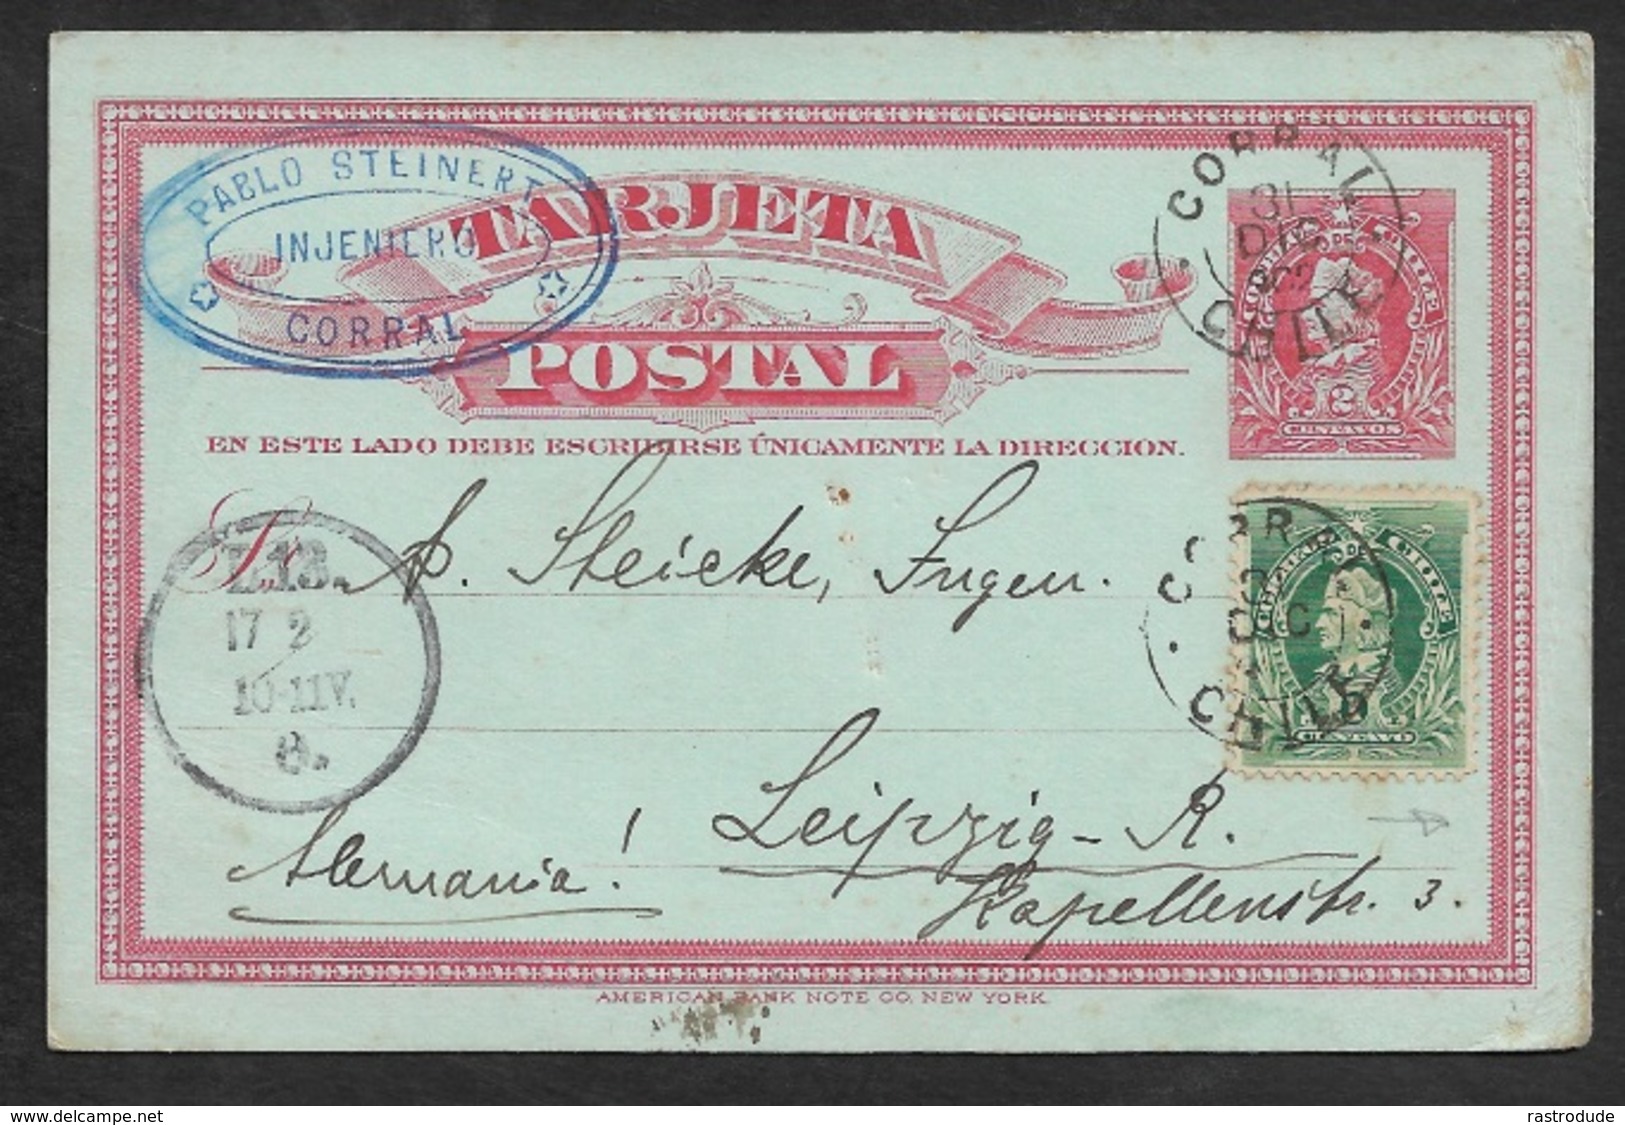 1902 - CHILE - SEAPOST - Uprated 2c PSC - CDS CORRAL 31 DIC To GERMANY - SIGNED BY THE CAPTAIN Of The S.S FORTUNA - Chili